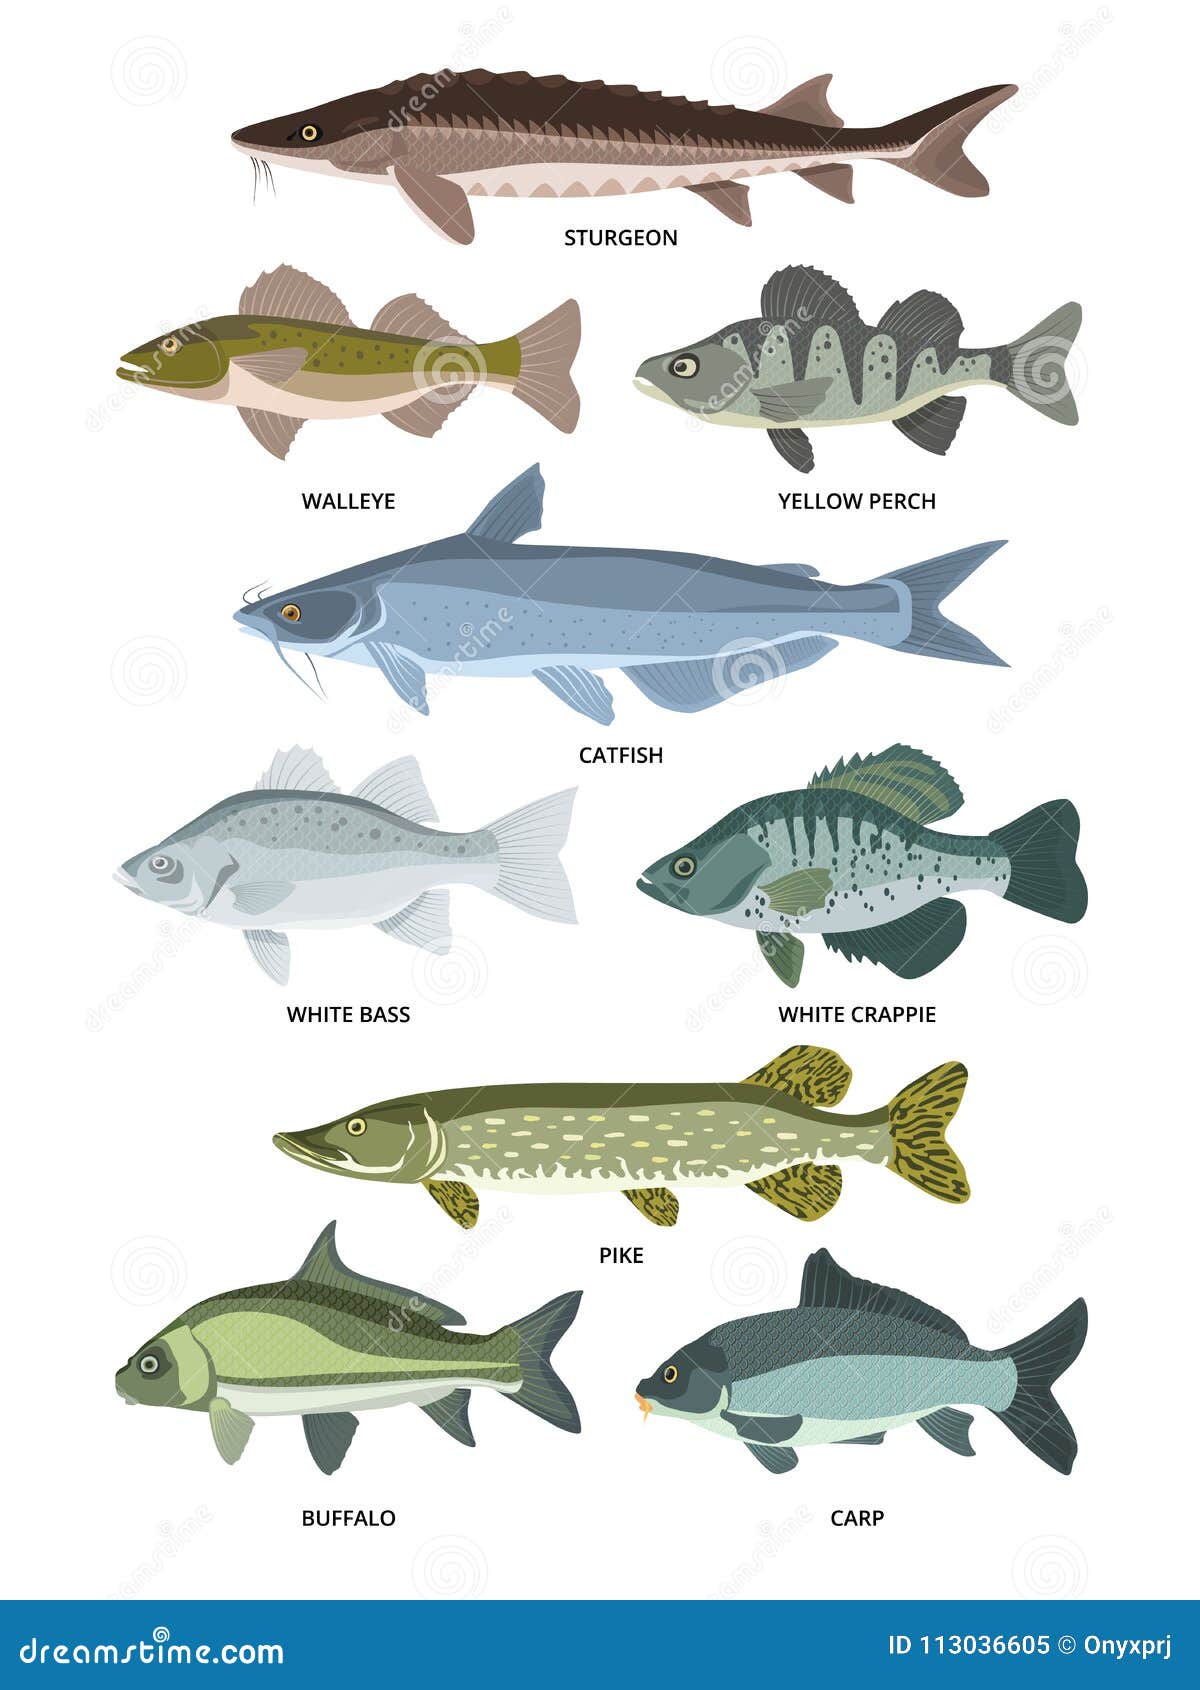  collection of different kinds of freshwater fish